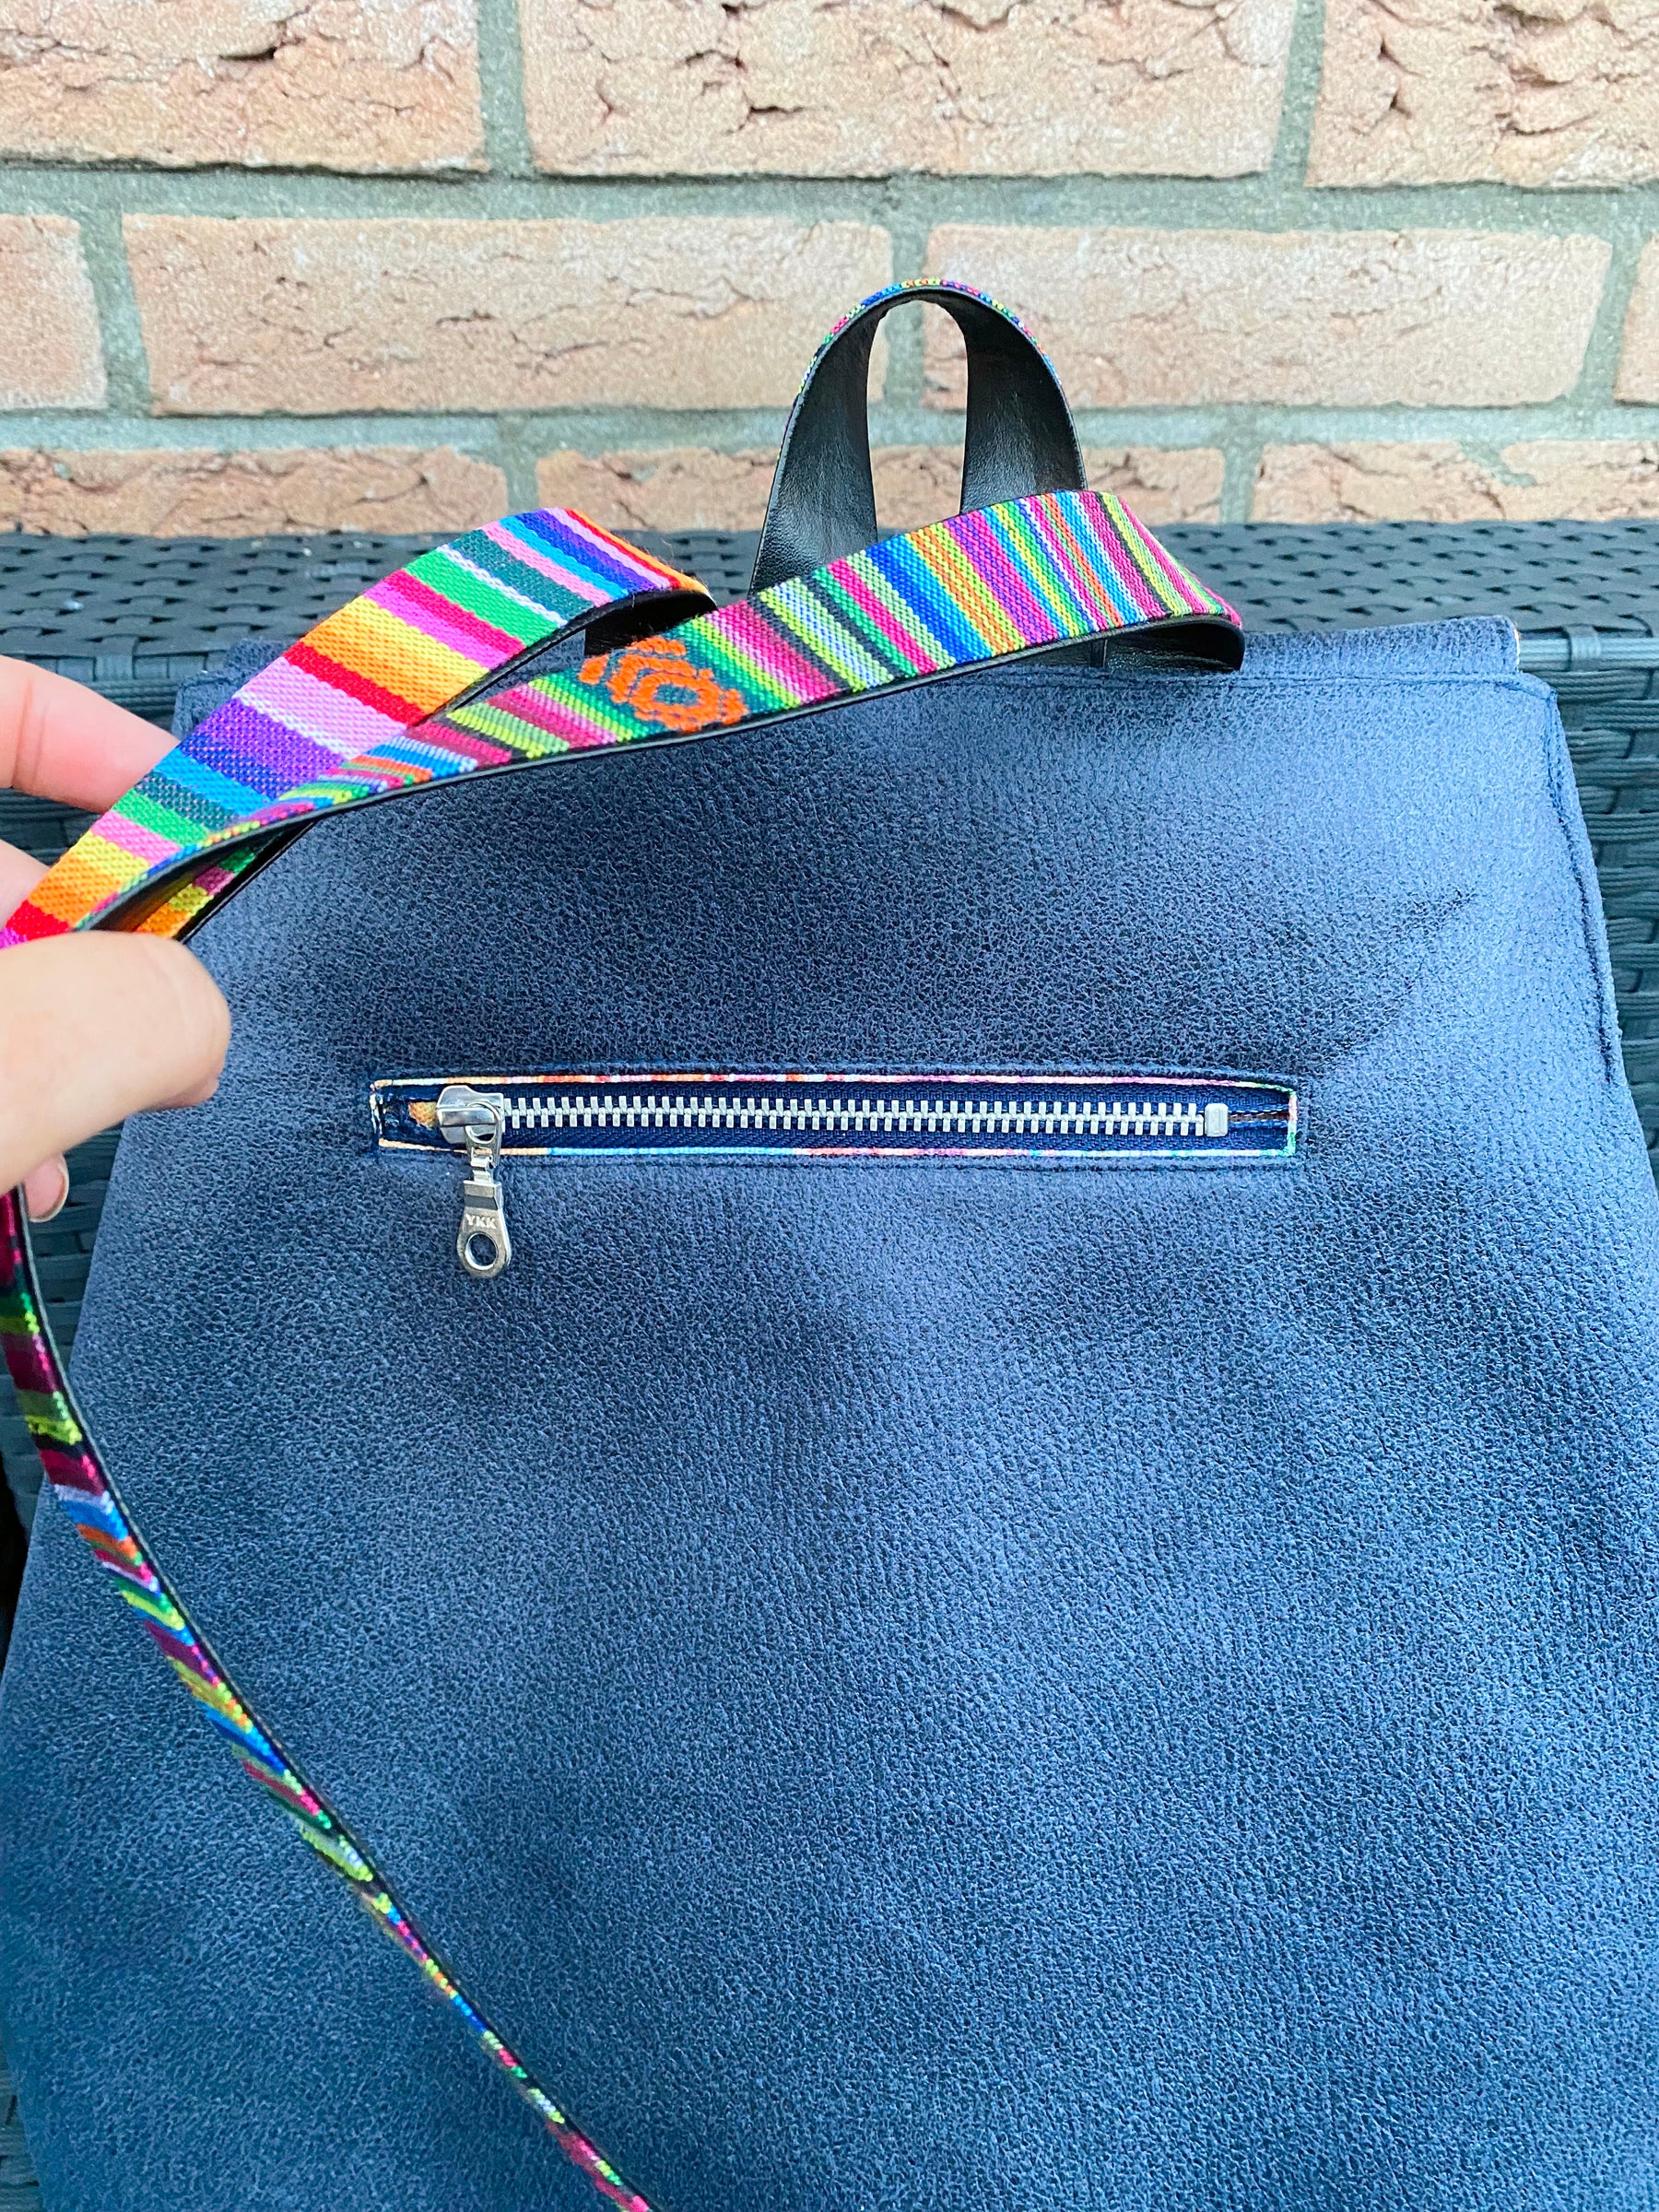 DIY Cute Rectangular Denim Coin Purse with Zipper Out of Old Jeans